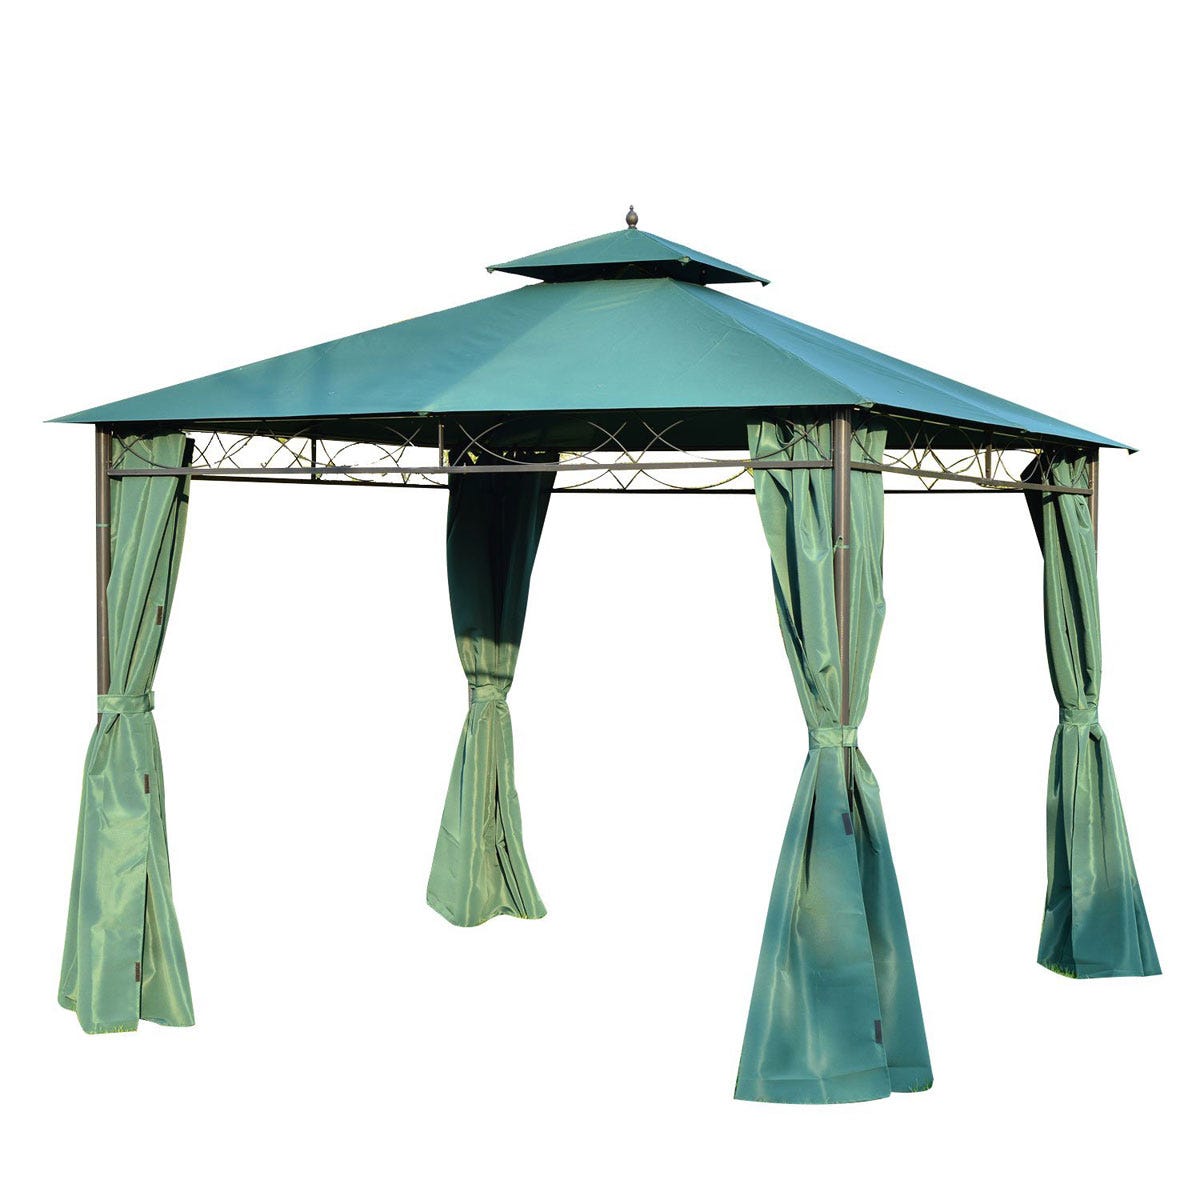 Outsunny 3 X 3M Metal Garden Gazebo Marquee Party Tent Canopy Pavilion Sidewalls